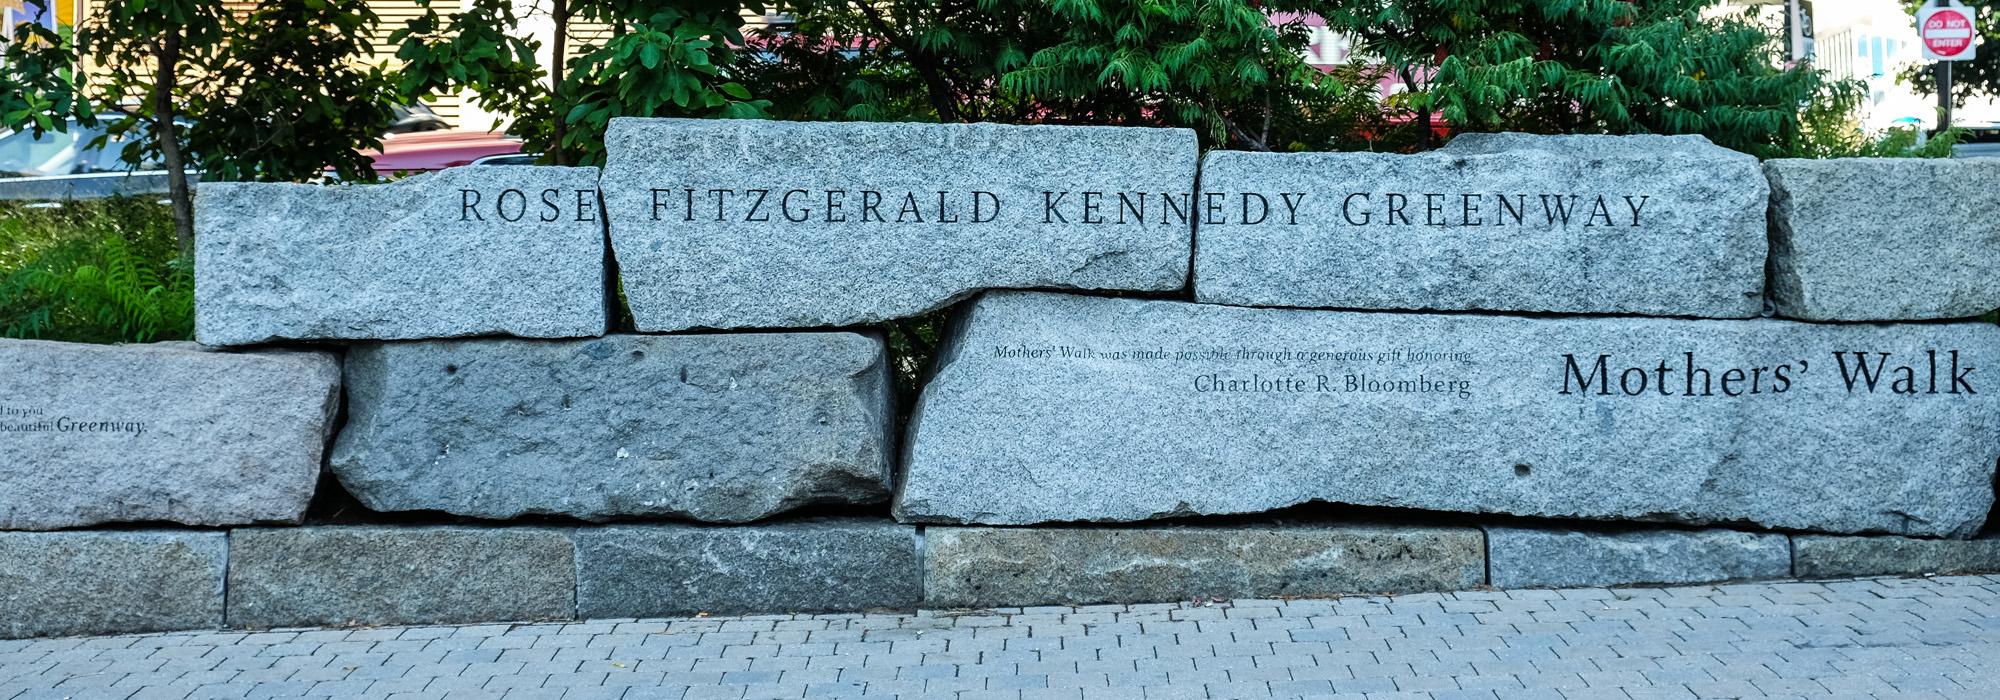 Rose Fitzgerald Kennedy Greenway